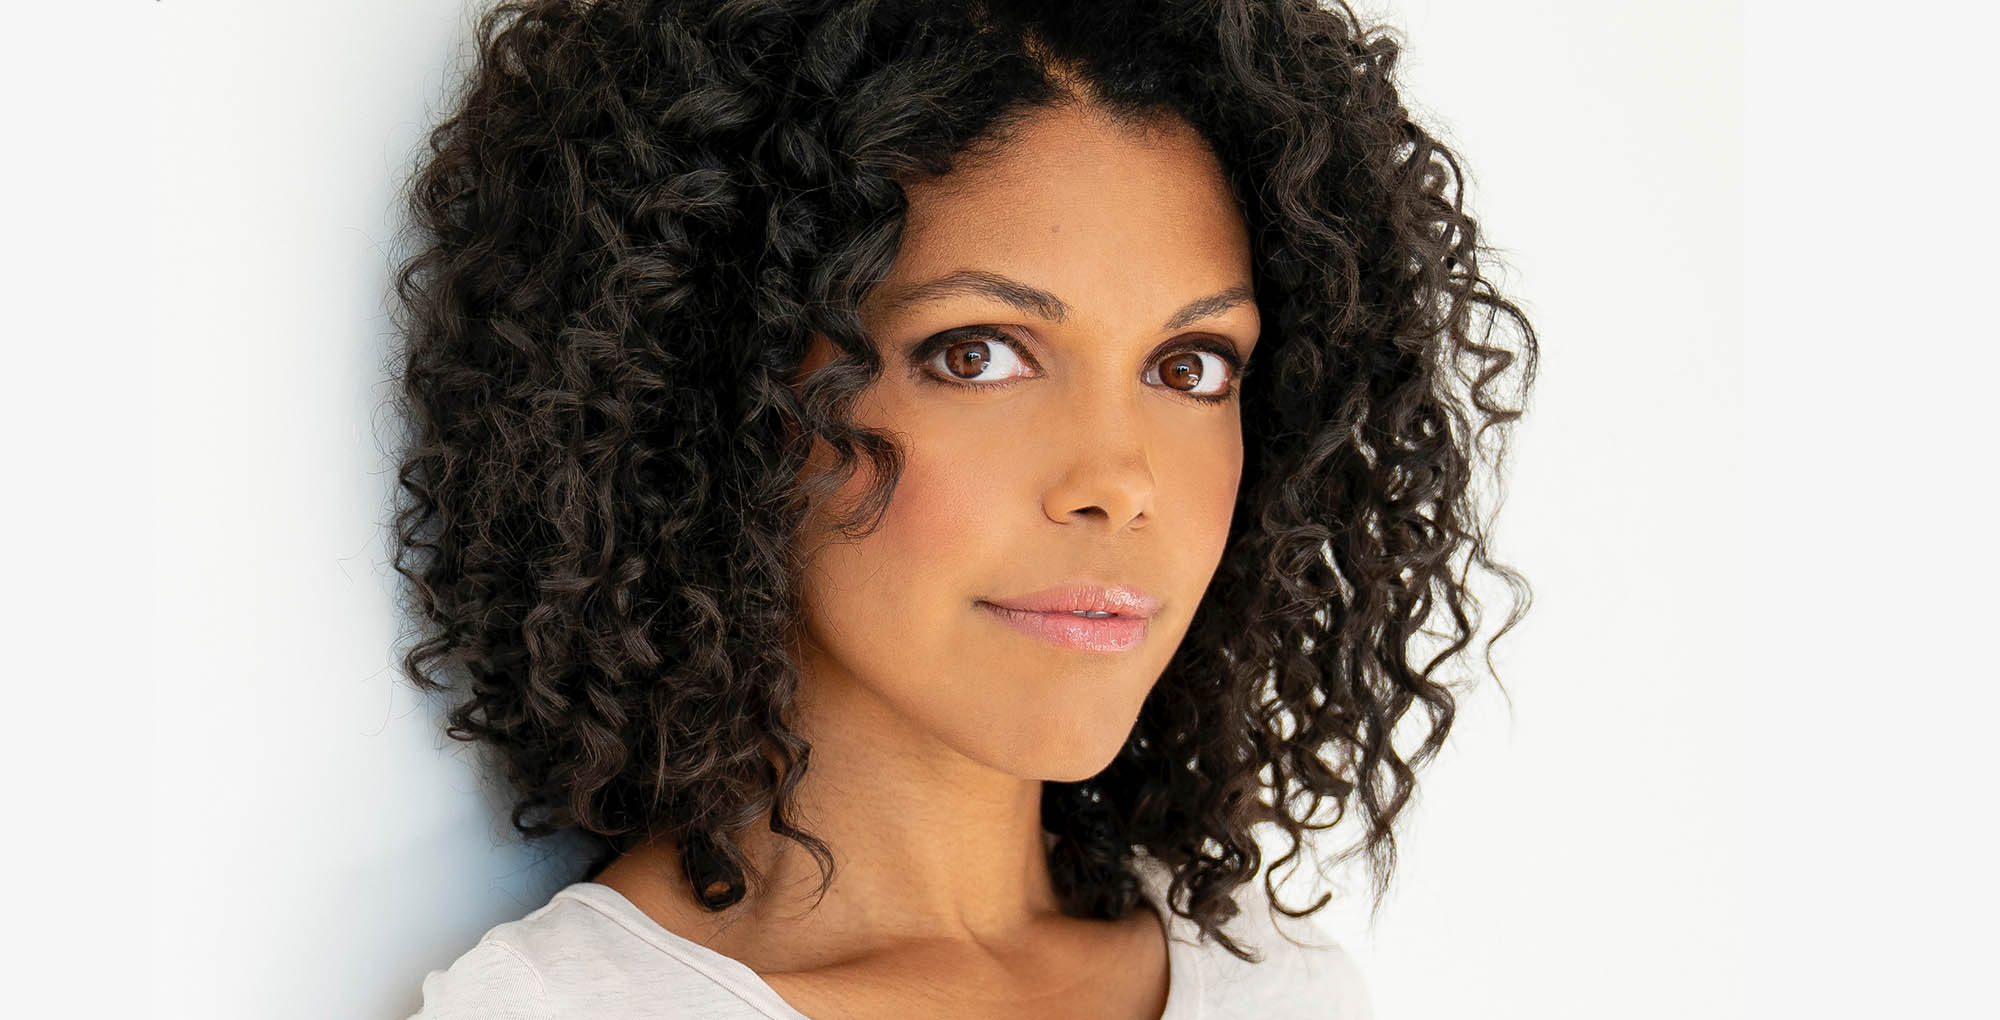 bold and the beautiful alum karla mosley.